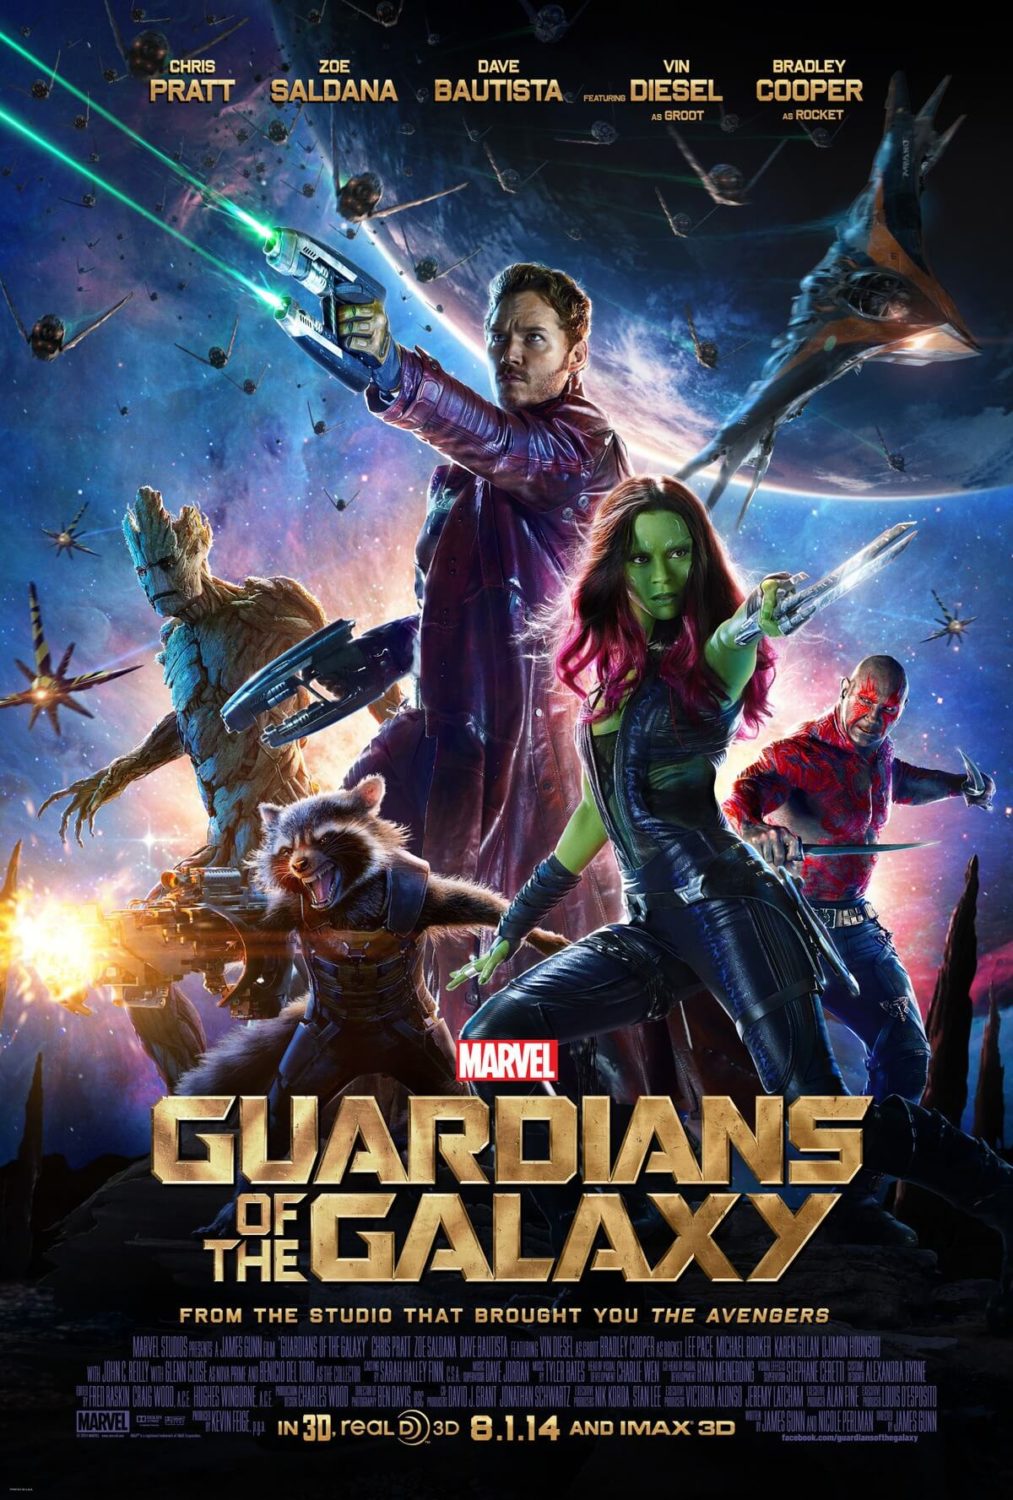 Guardians of the Galaxy poster from successful Lost Boys School of VFX alumni credits for Visual Effects.